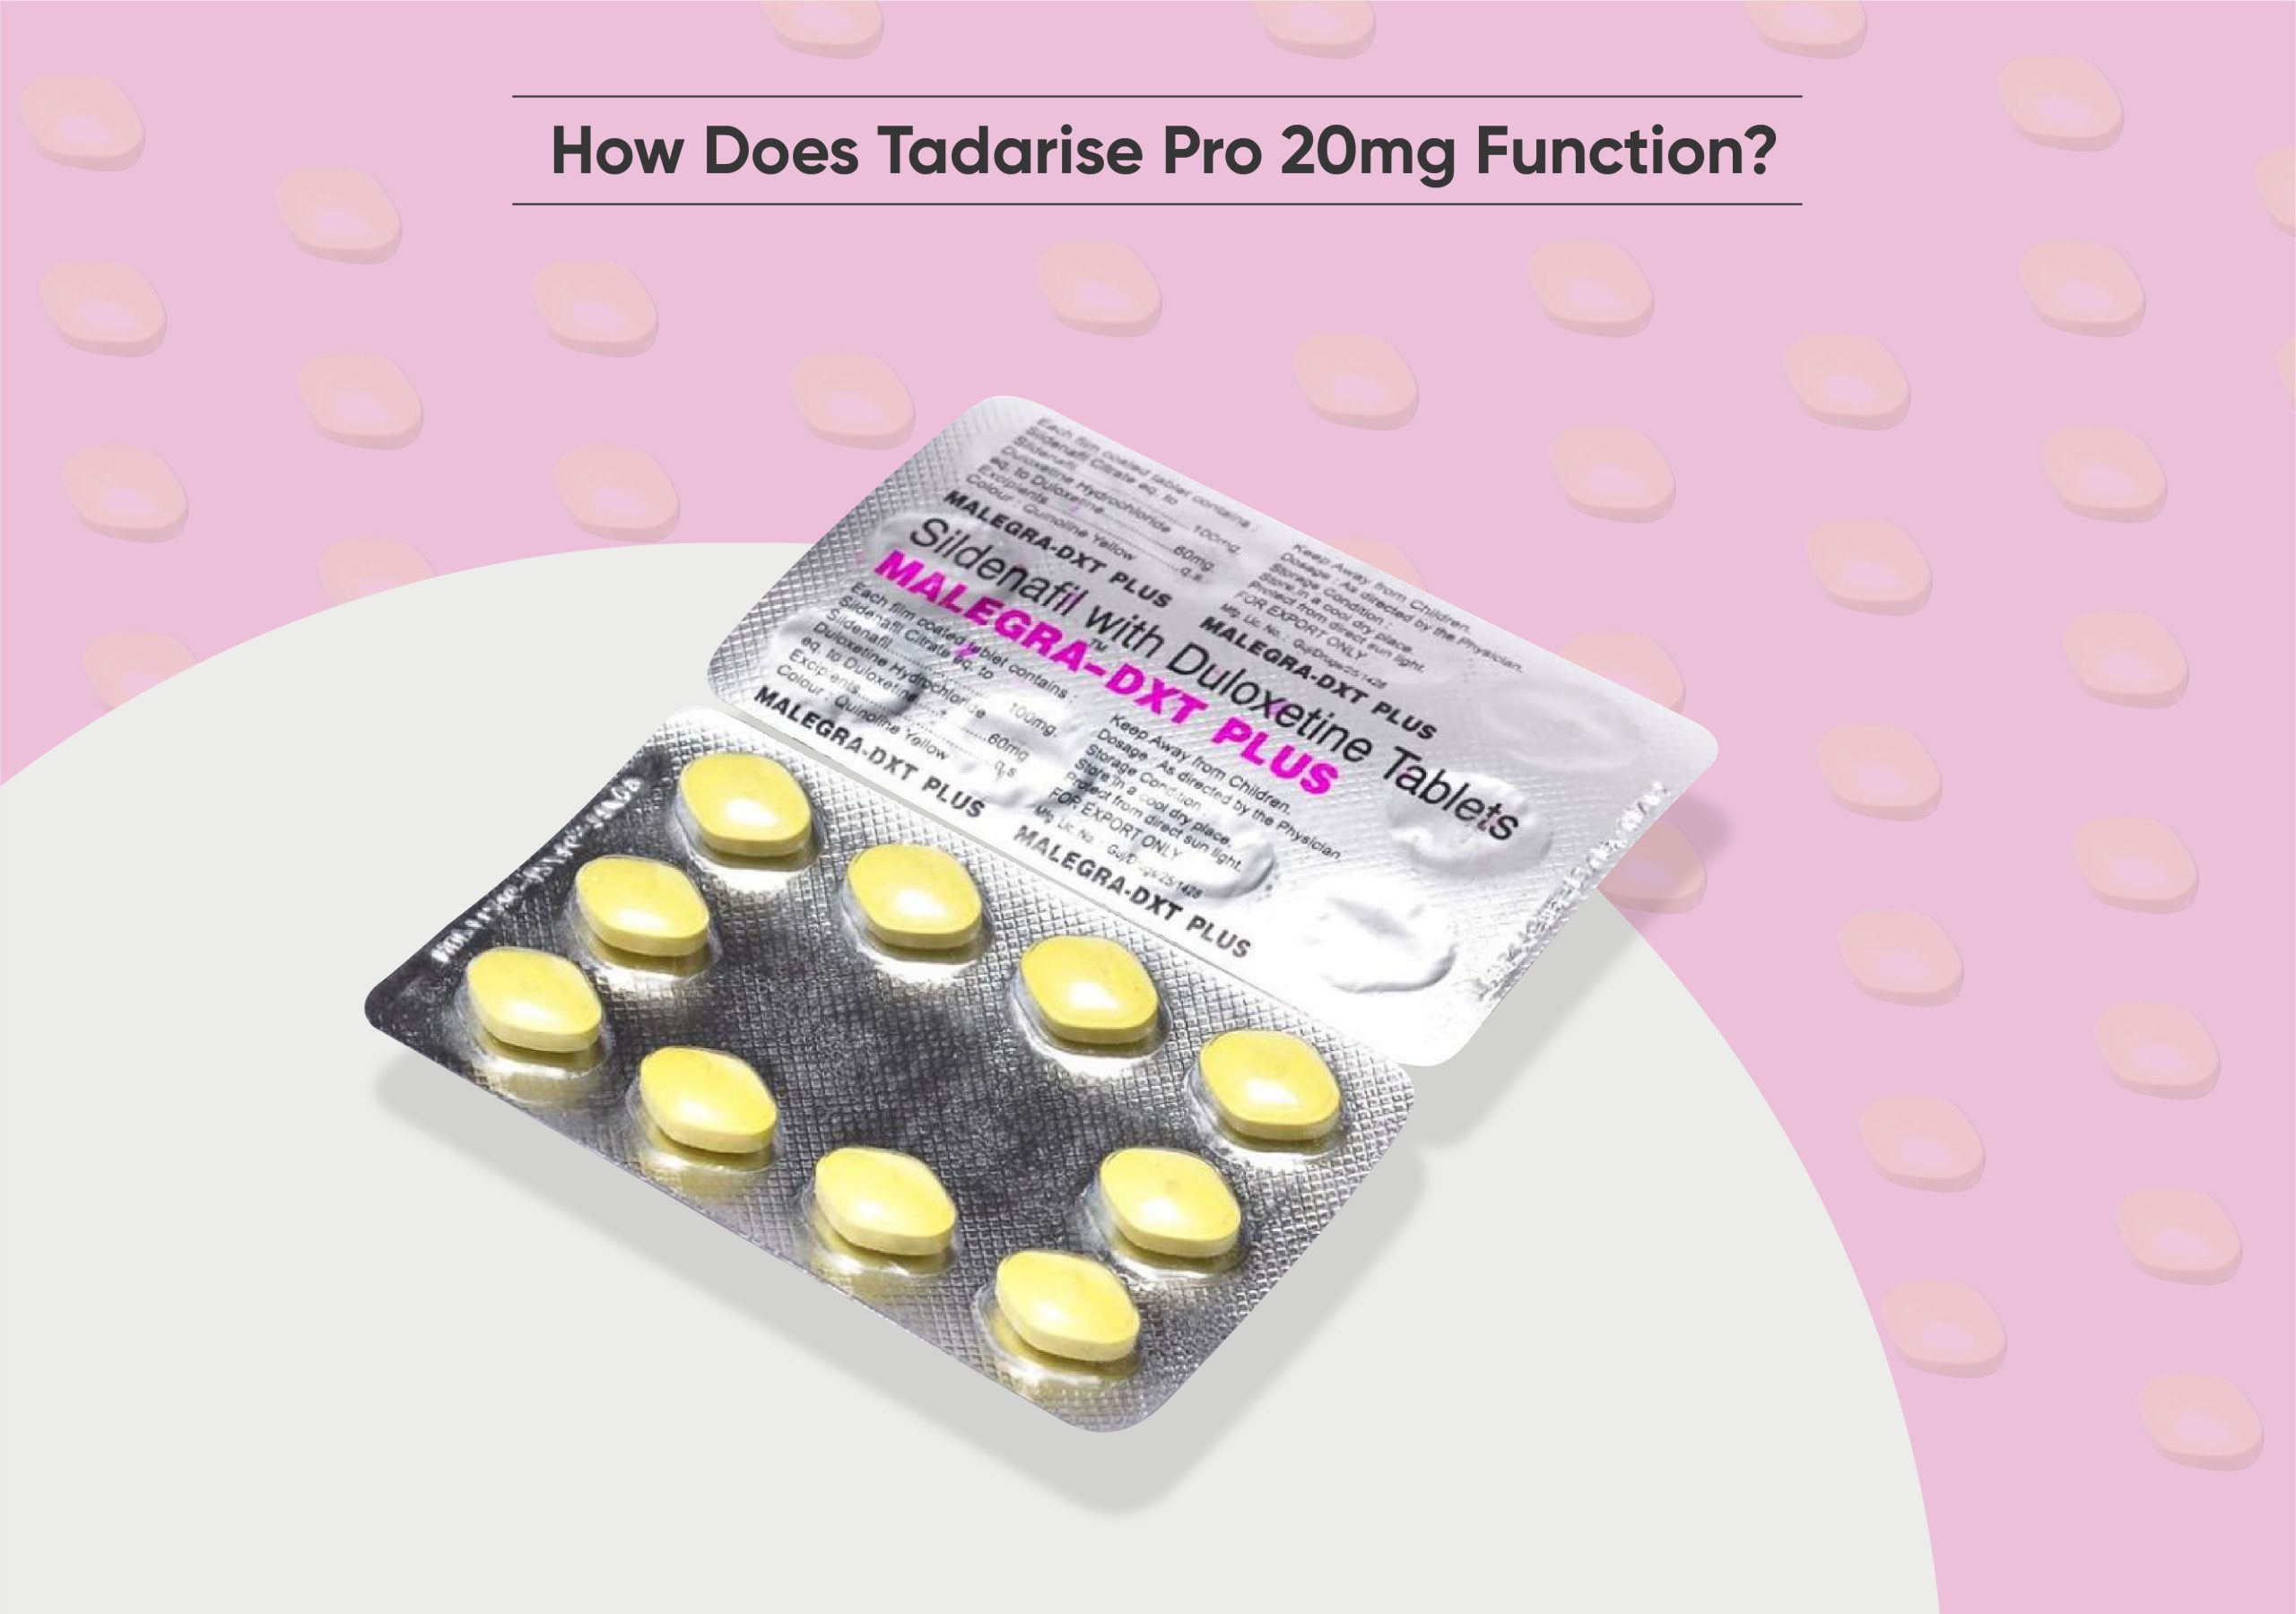 How does Tadarise pro 20mg function